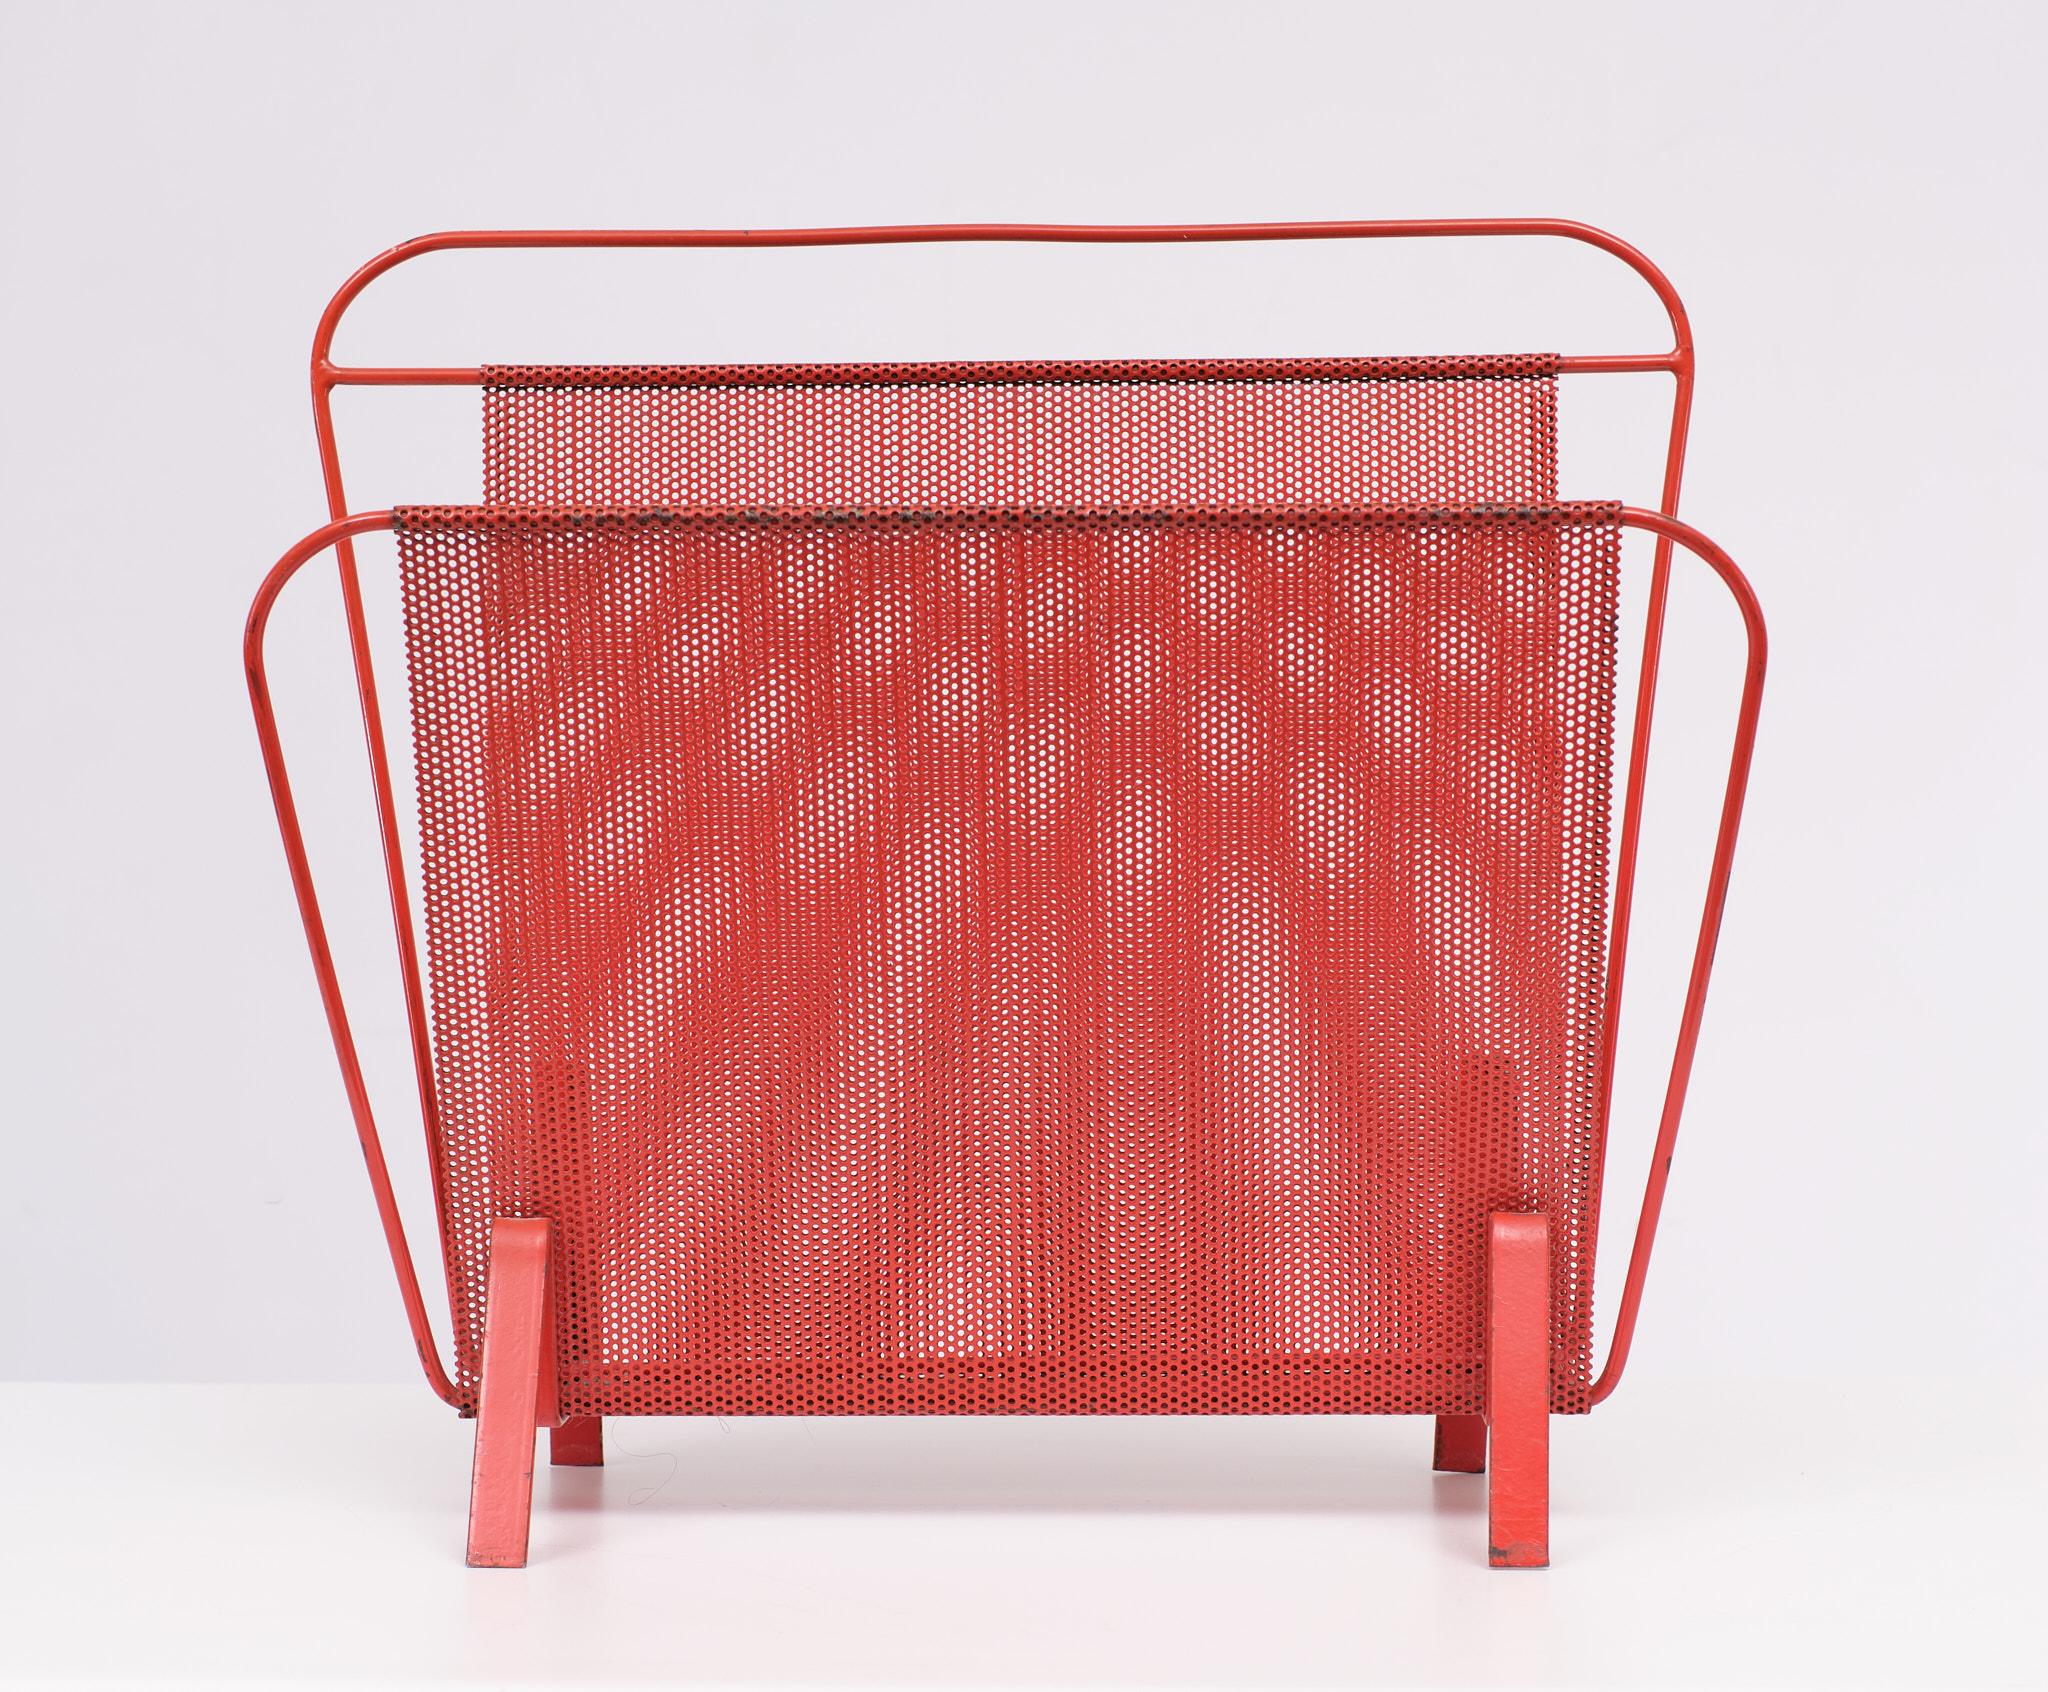 Vintage design magazine holder of perforated metal. Nice bright Red color The magazine holder is designed by Mathieu Mategot for Artimeta, Soest in the early sixties. The condition is good, see the detail photos.